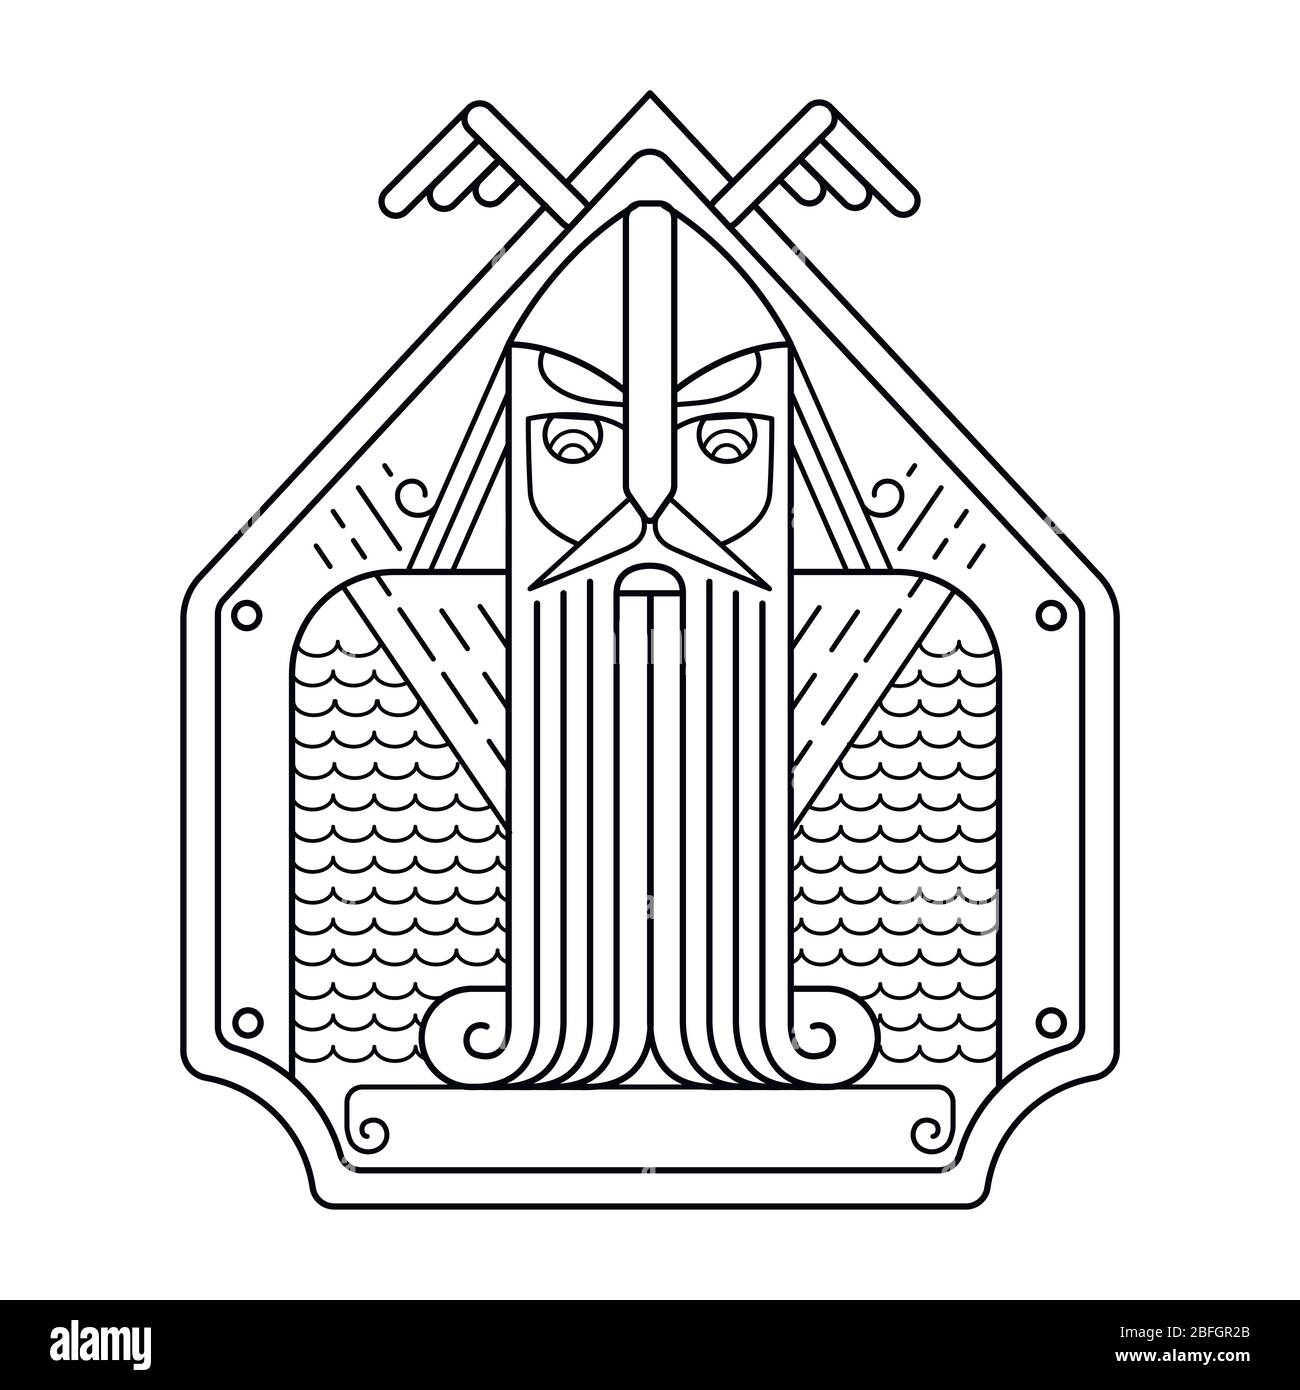 Sketch of a man in chain mail and beard. Stock Vector